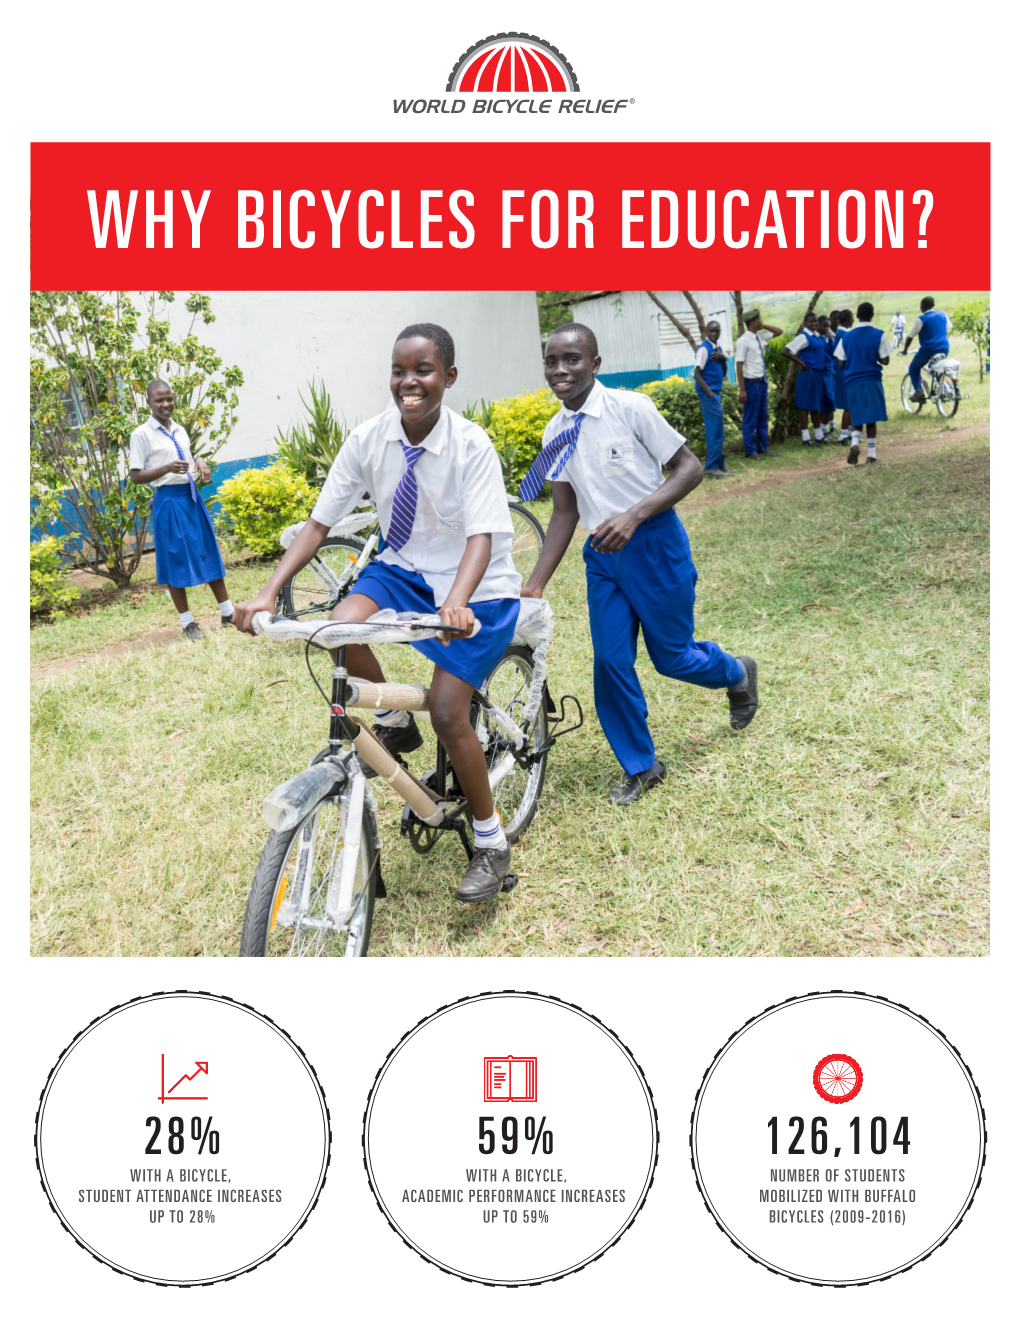 Why Bicycles for Education?